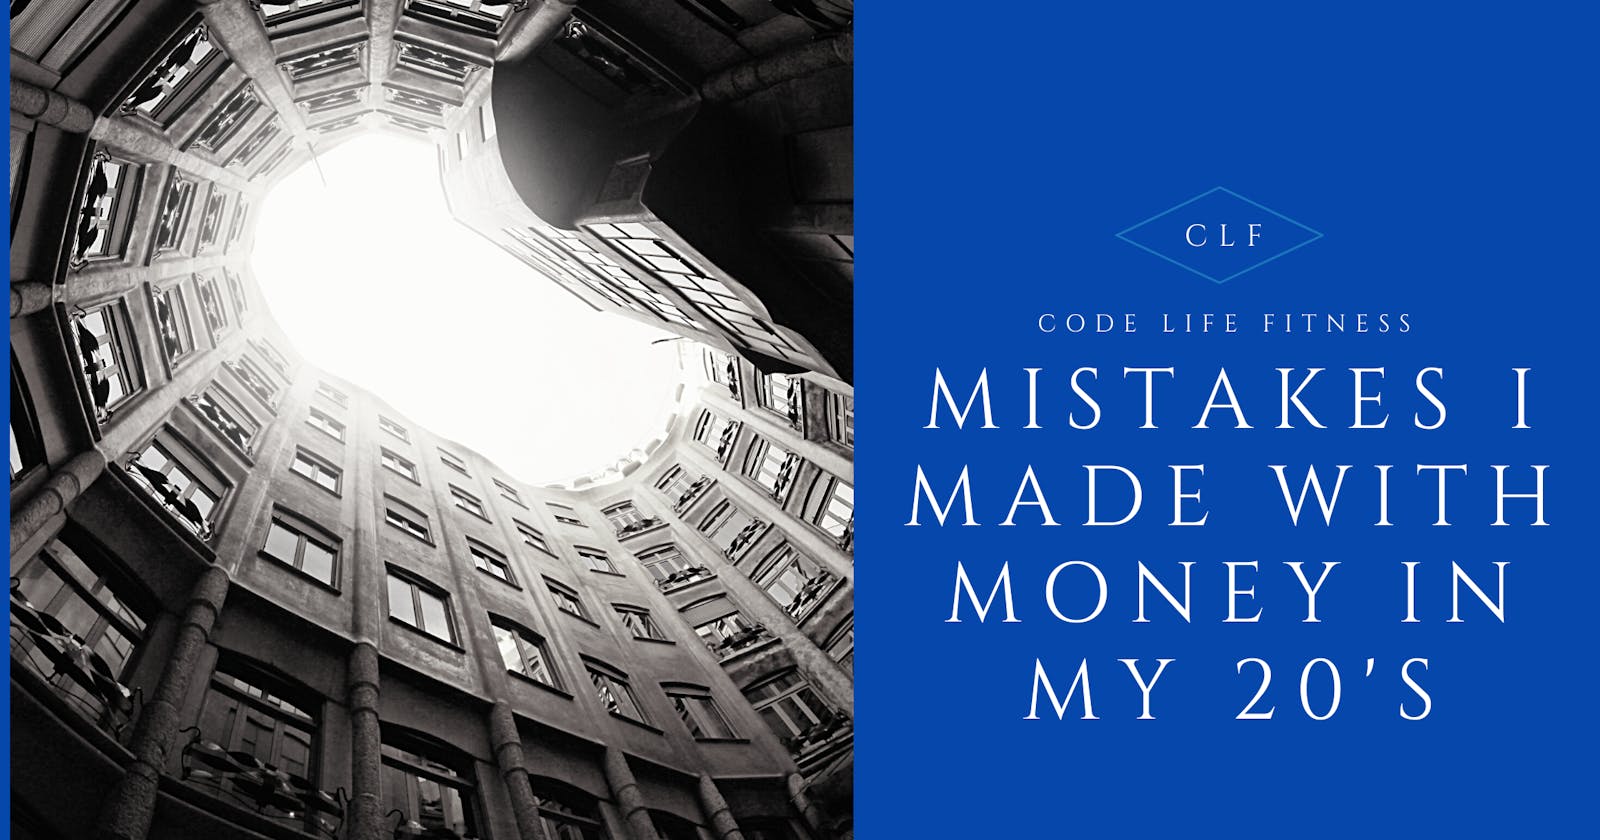 Mistakes I made with money in my 20s 
Actions that I take to correct those mistakes in the early 30s.